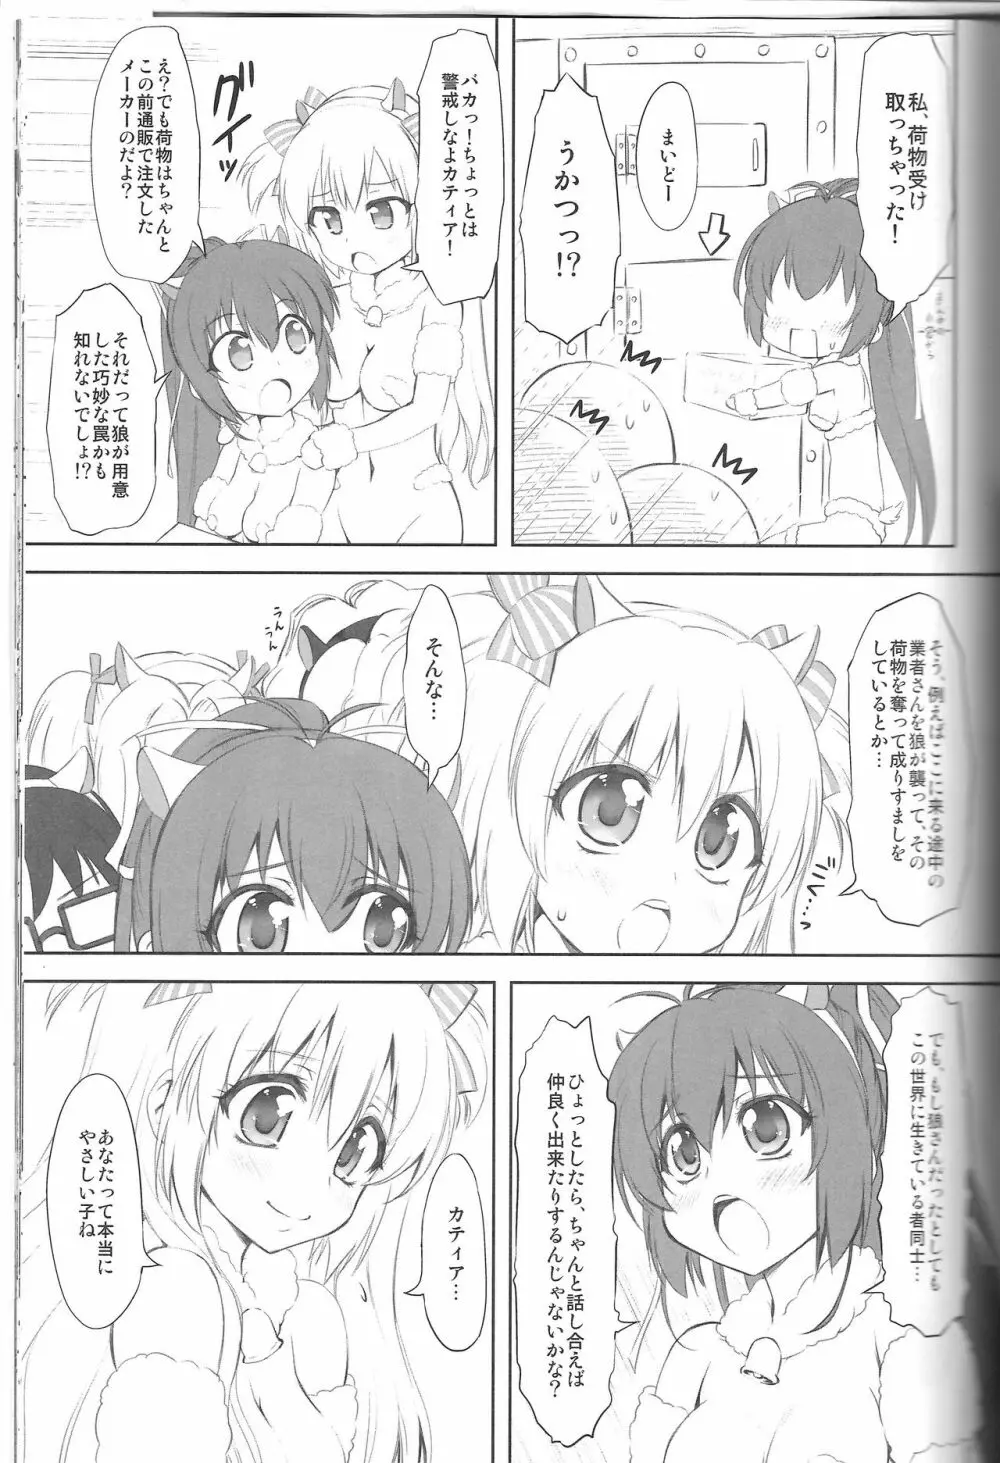 7Girls and wolf Page.7